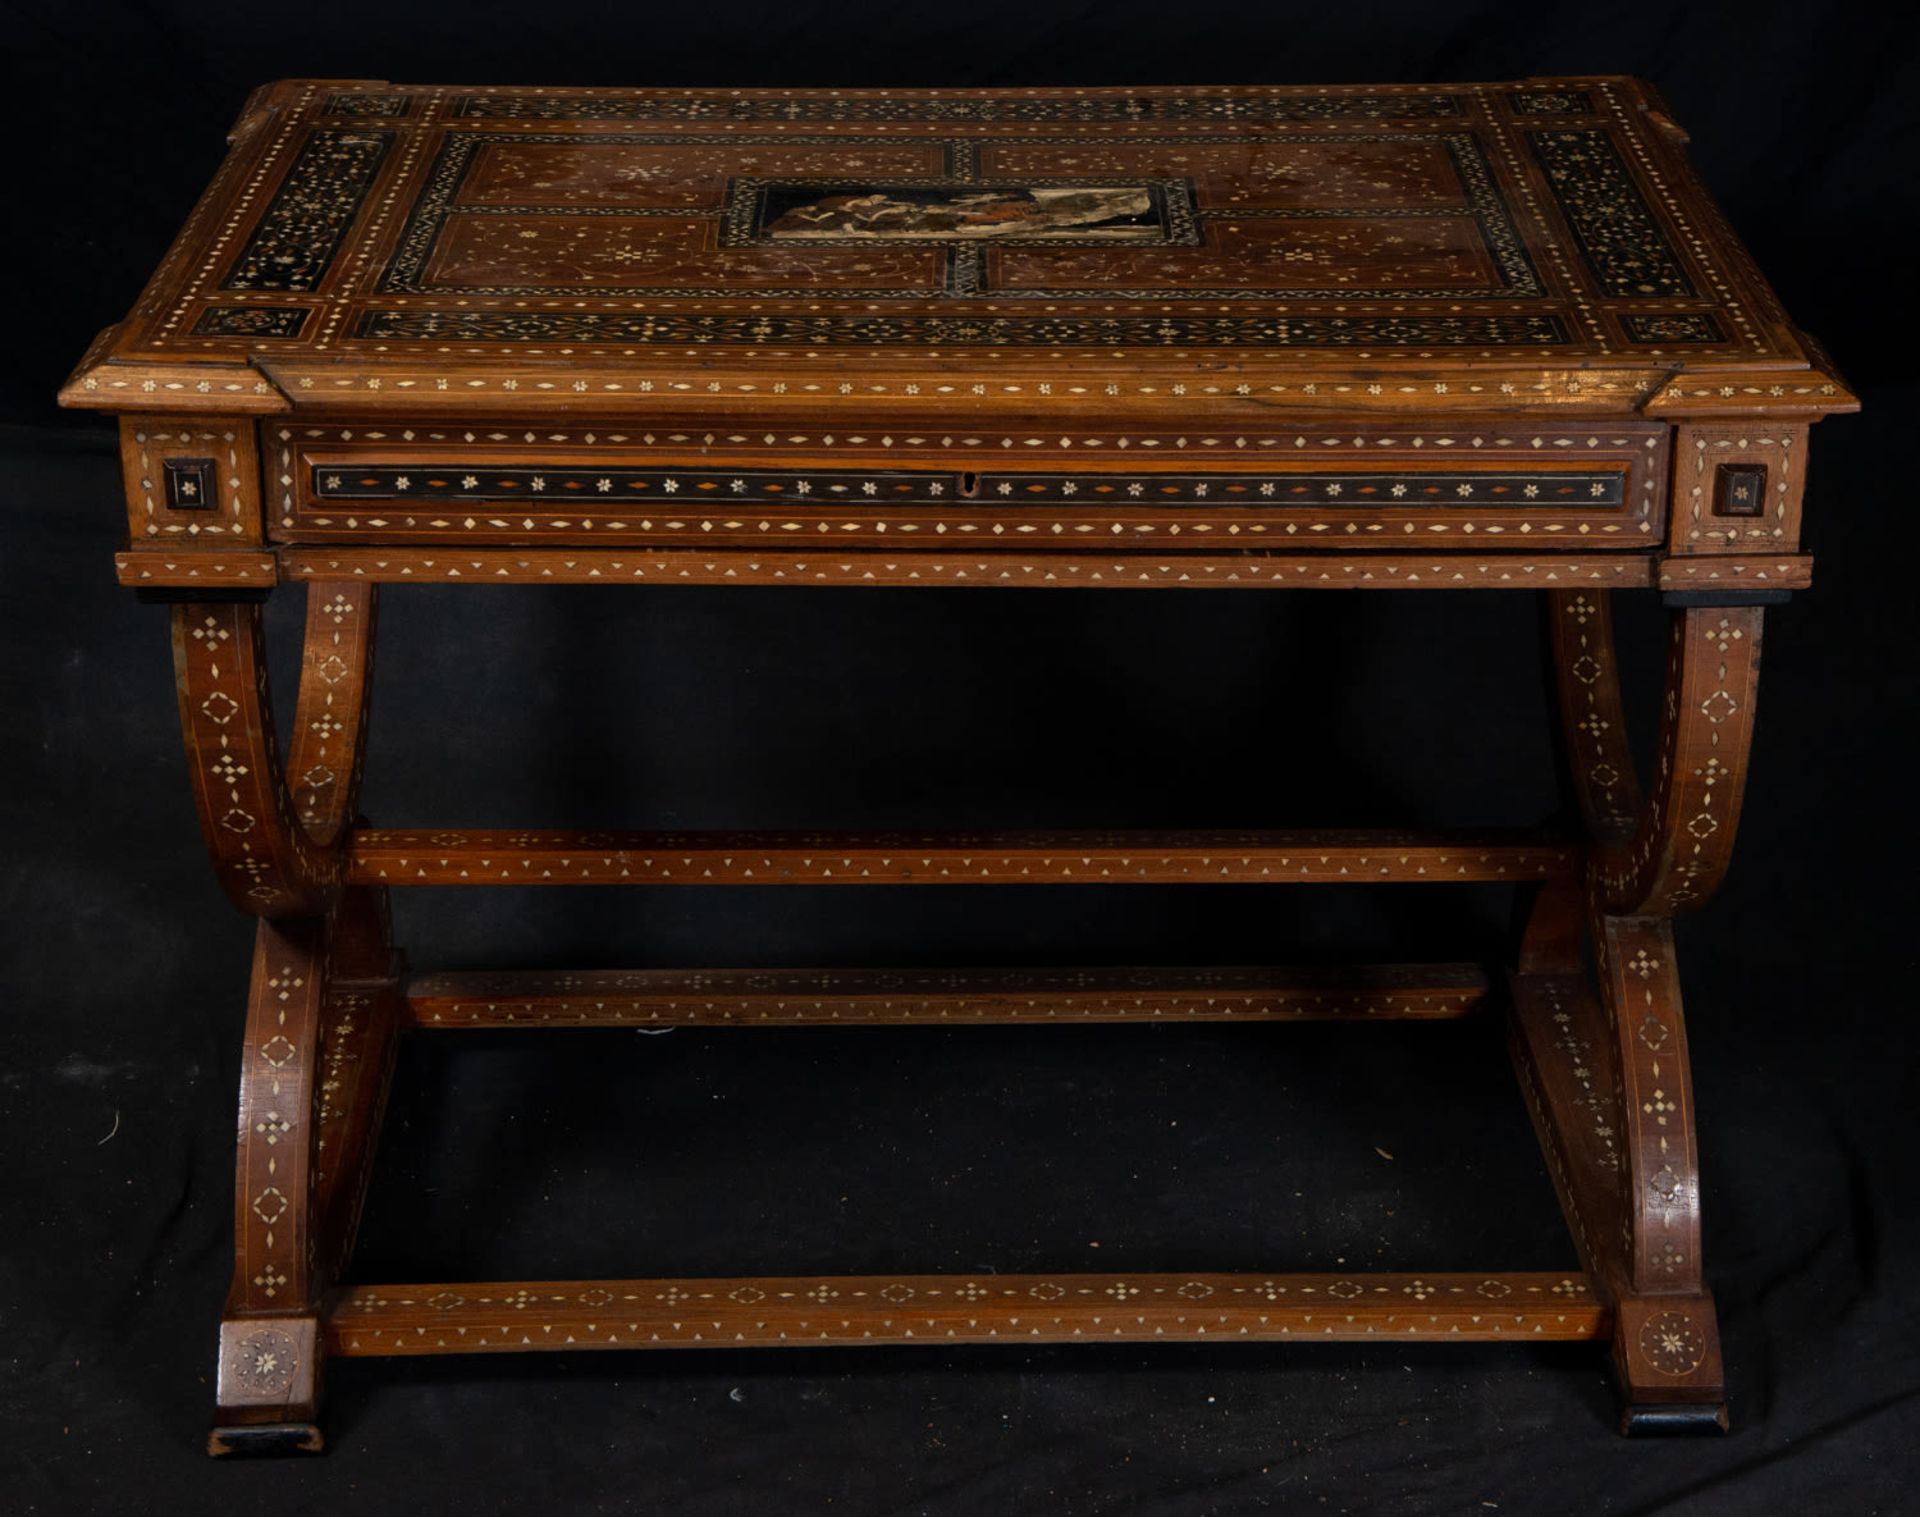 Exceptional Piedmontese Table in Bone inlay, Italian work of the 18th century - Image 3 of 7